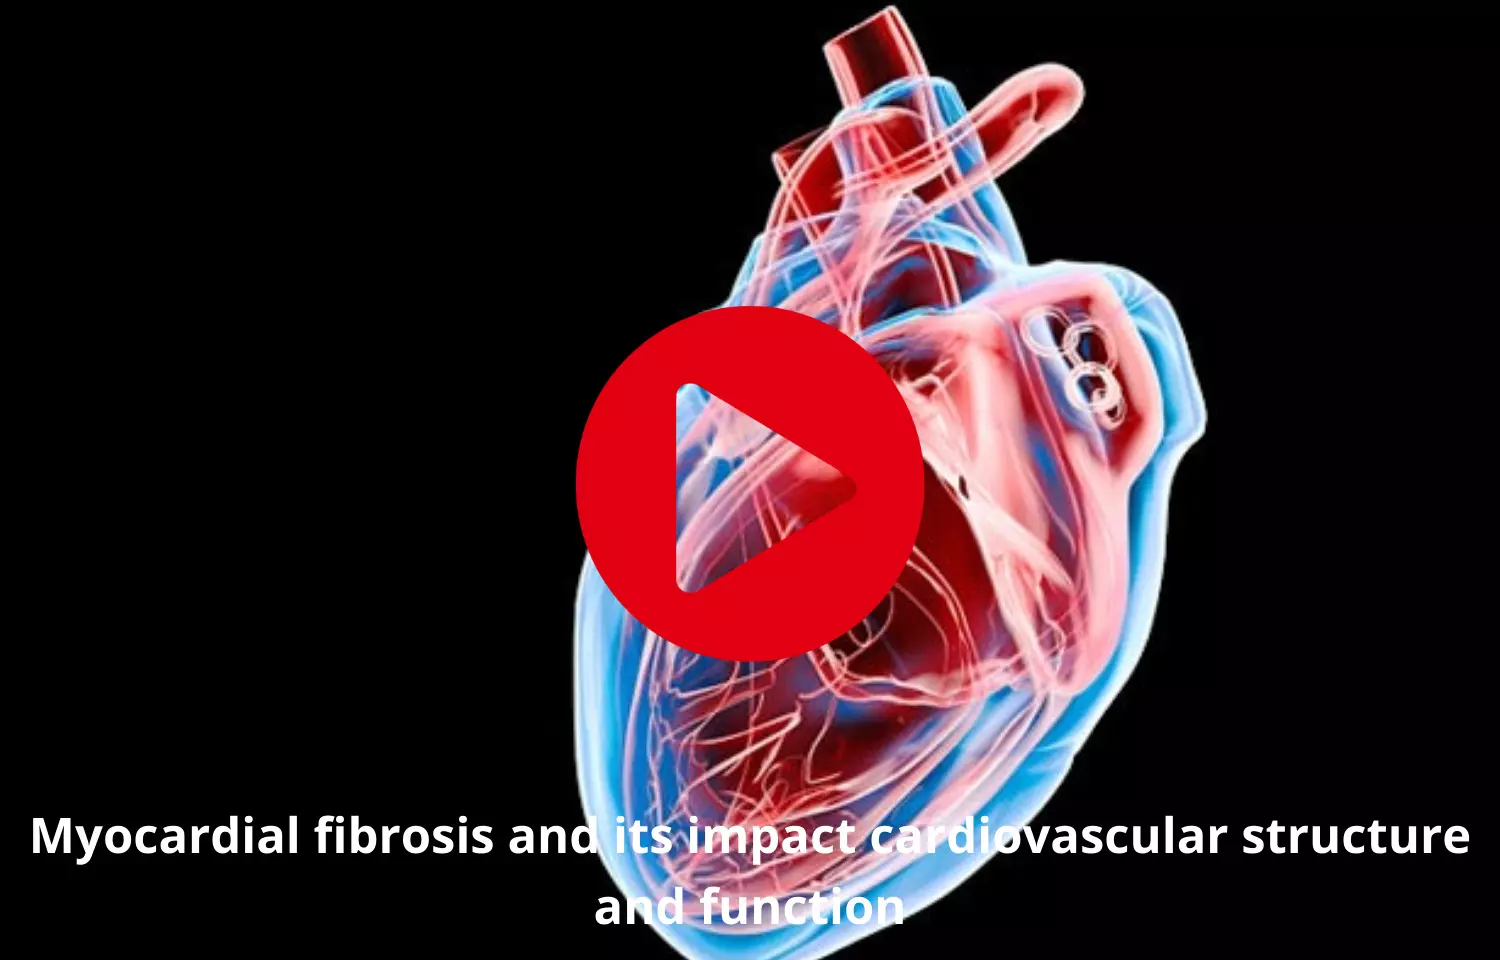 Myocardial fibrosis to affect cardiovascular structure and function